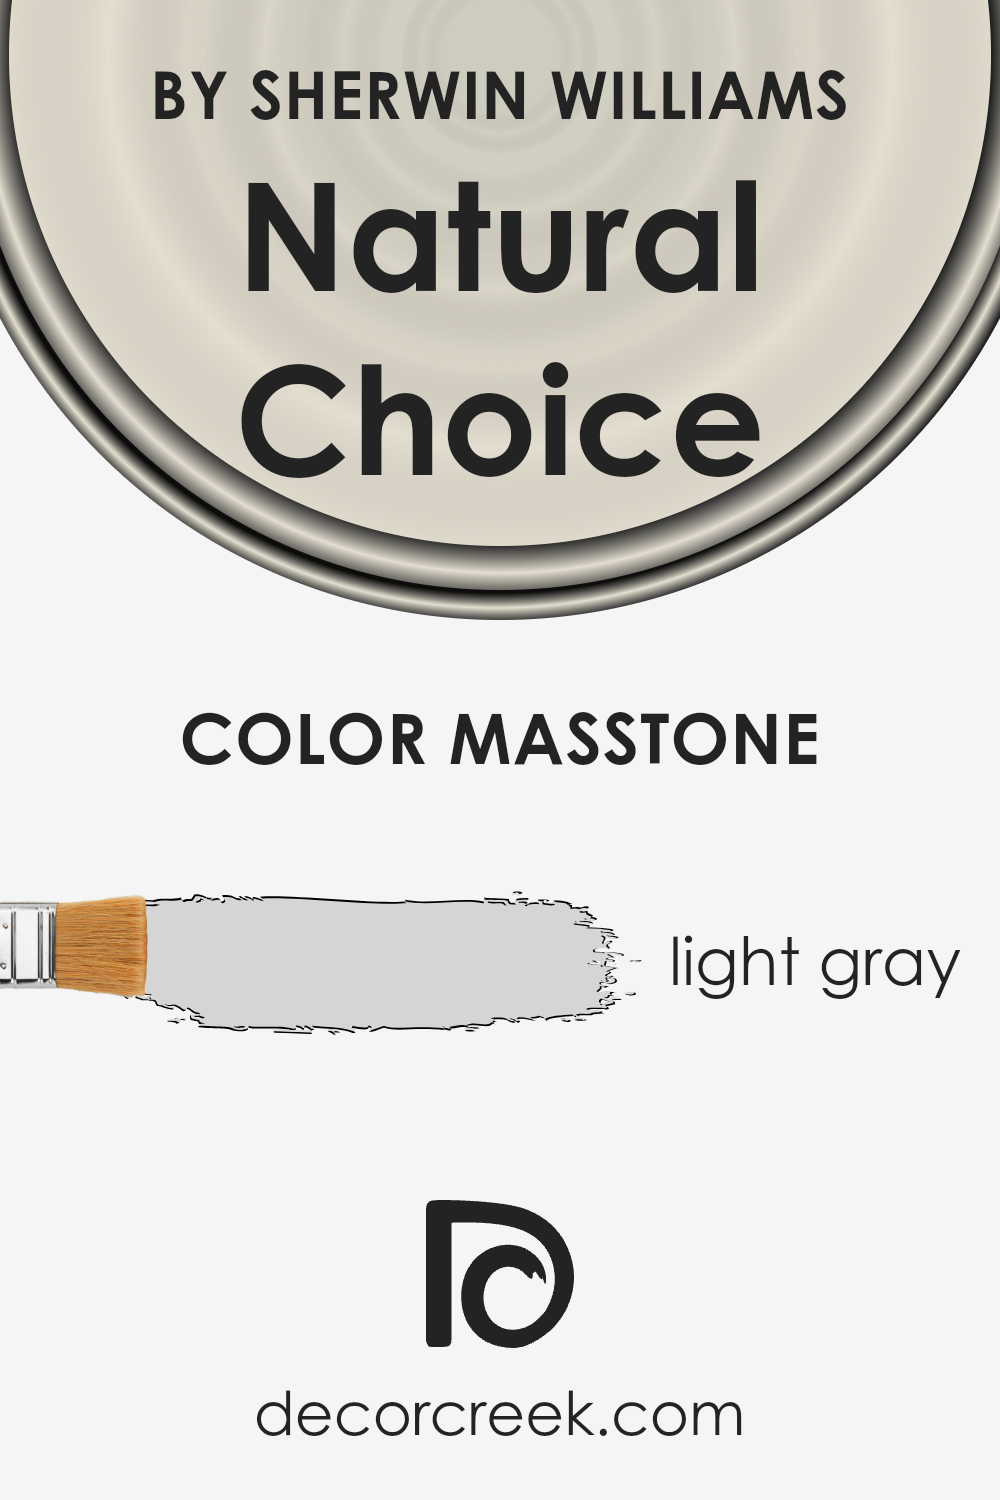 what_is_the_masstone_of_natural_choice_sw_7011